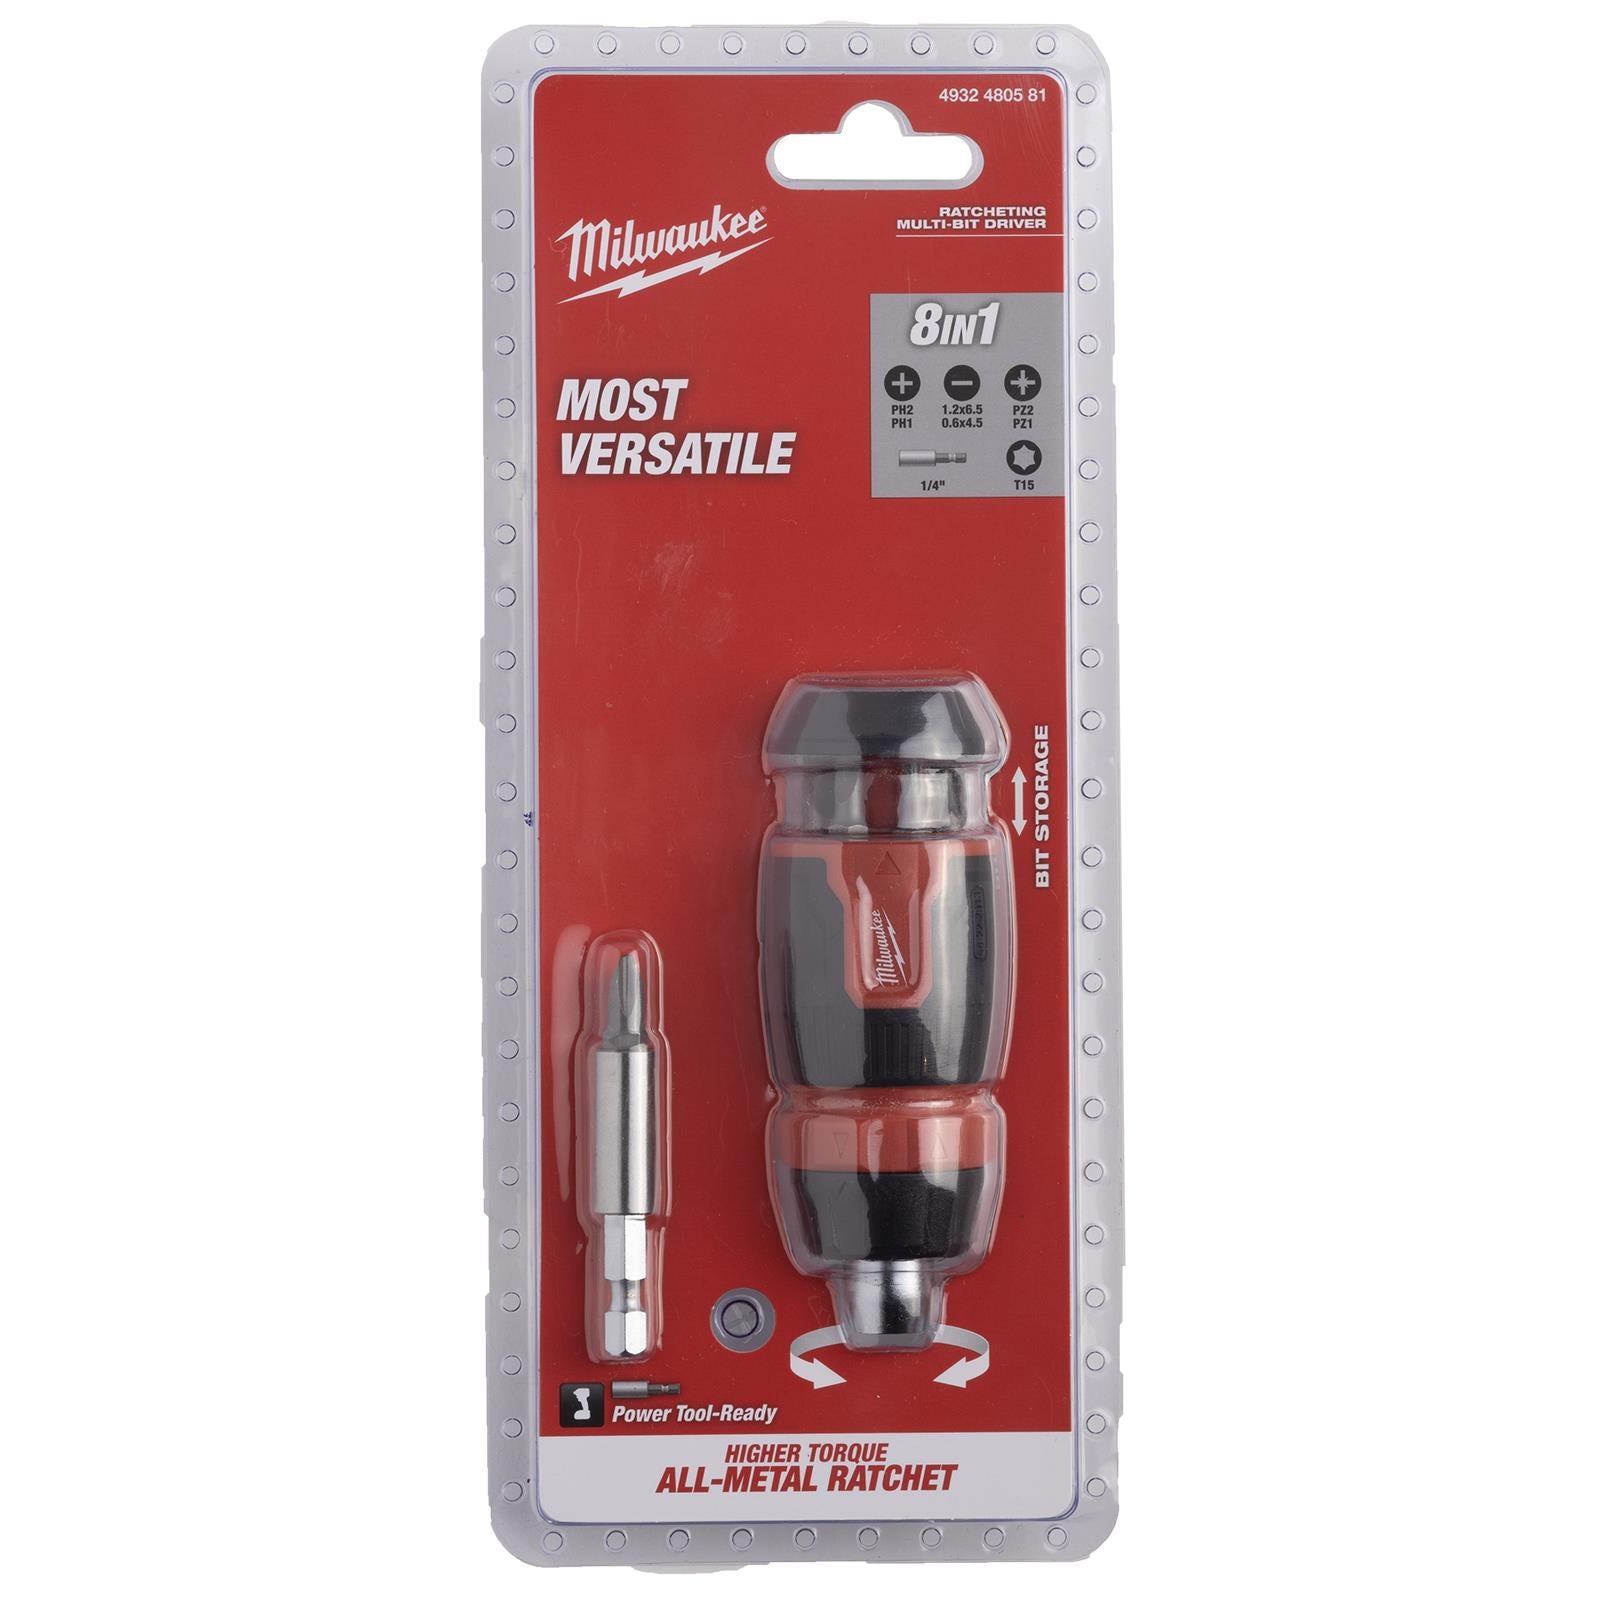 Milwaukee Ratchet Screwdriver Set Compact 8 in 1 Multi Bit Stubby Pozi Phillips Torx Slotted